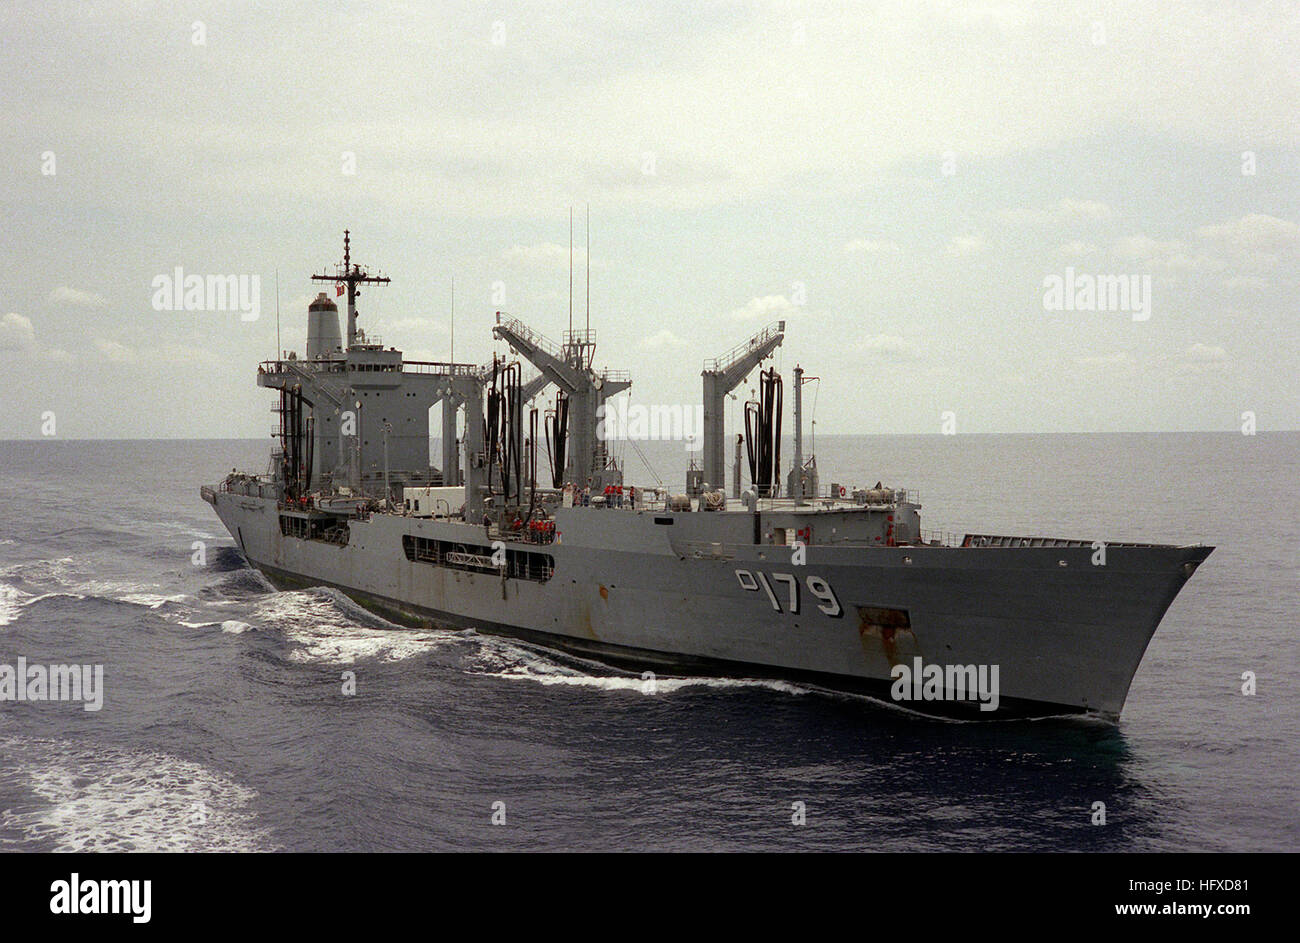 A starboard bow view of replenishment oiler USS MERRIMACK (AO-179) underway off the Virginia Capes. USS Merrimack (AO-179) off Virginia Capes 1985 Stock Photo